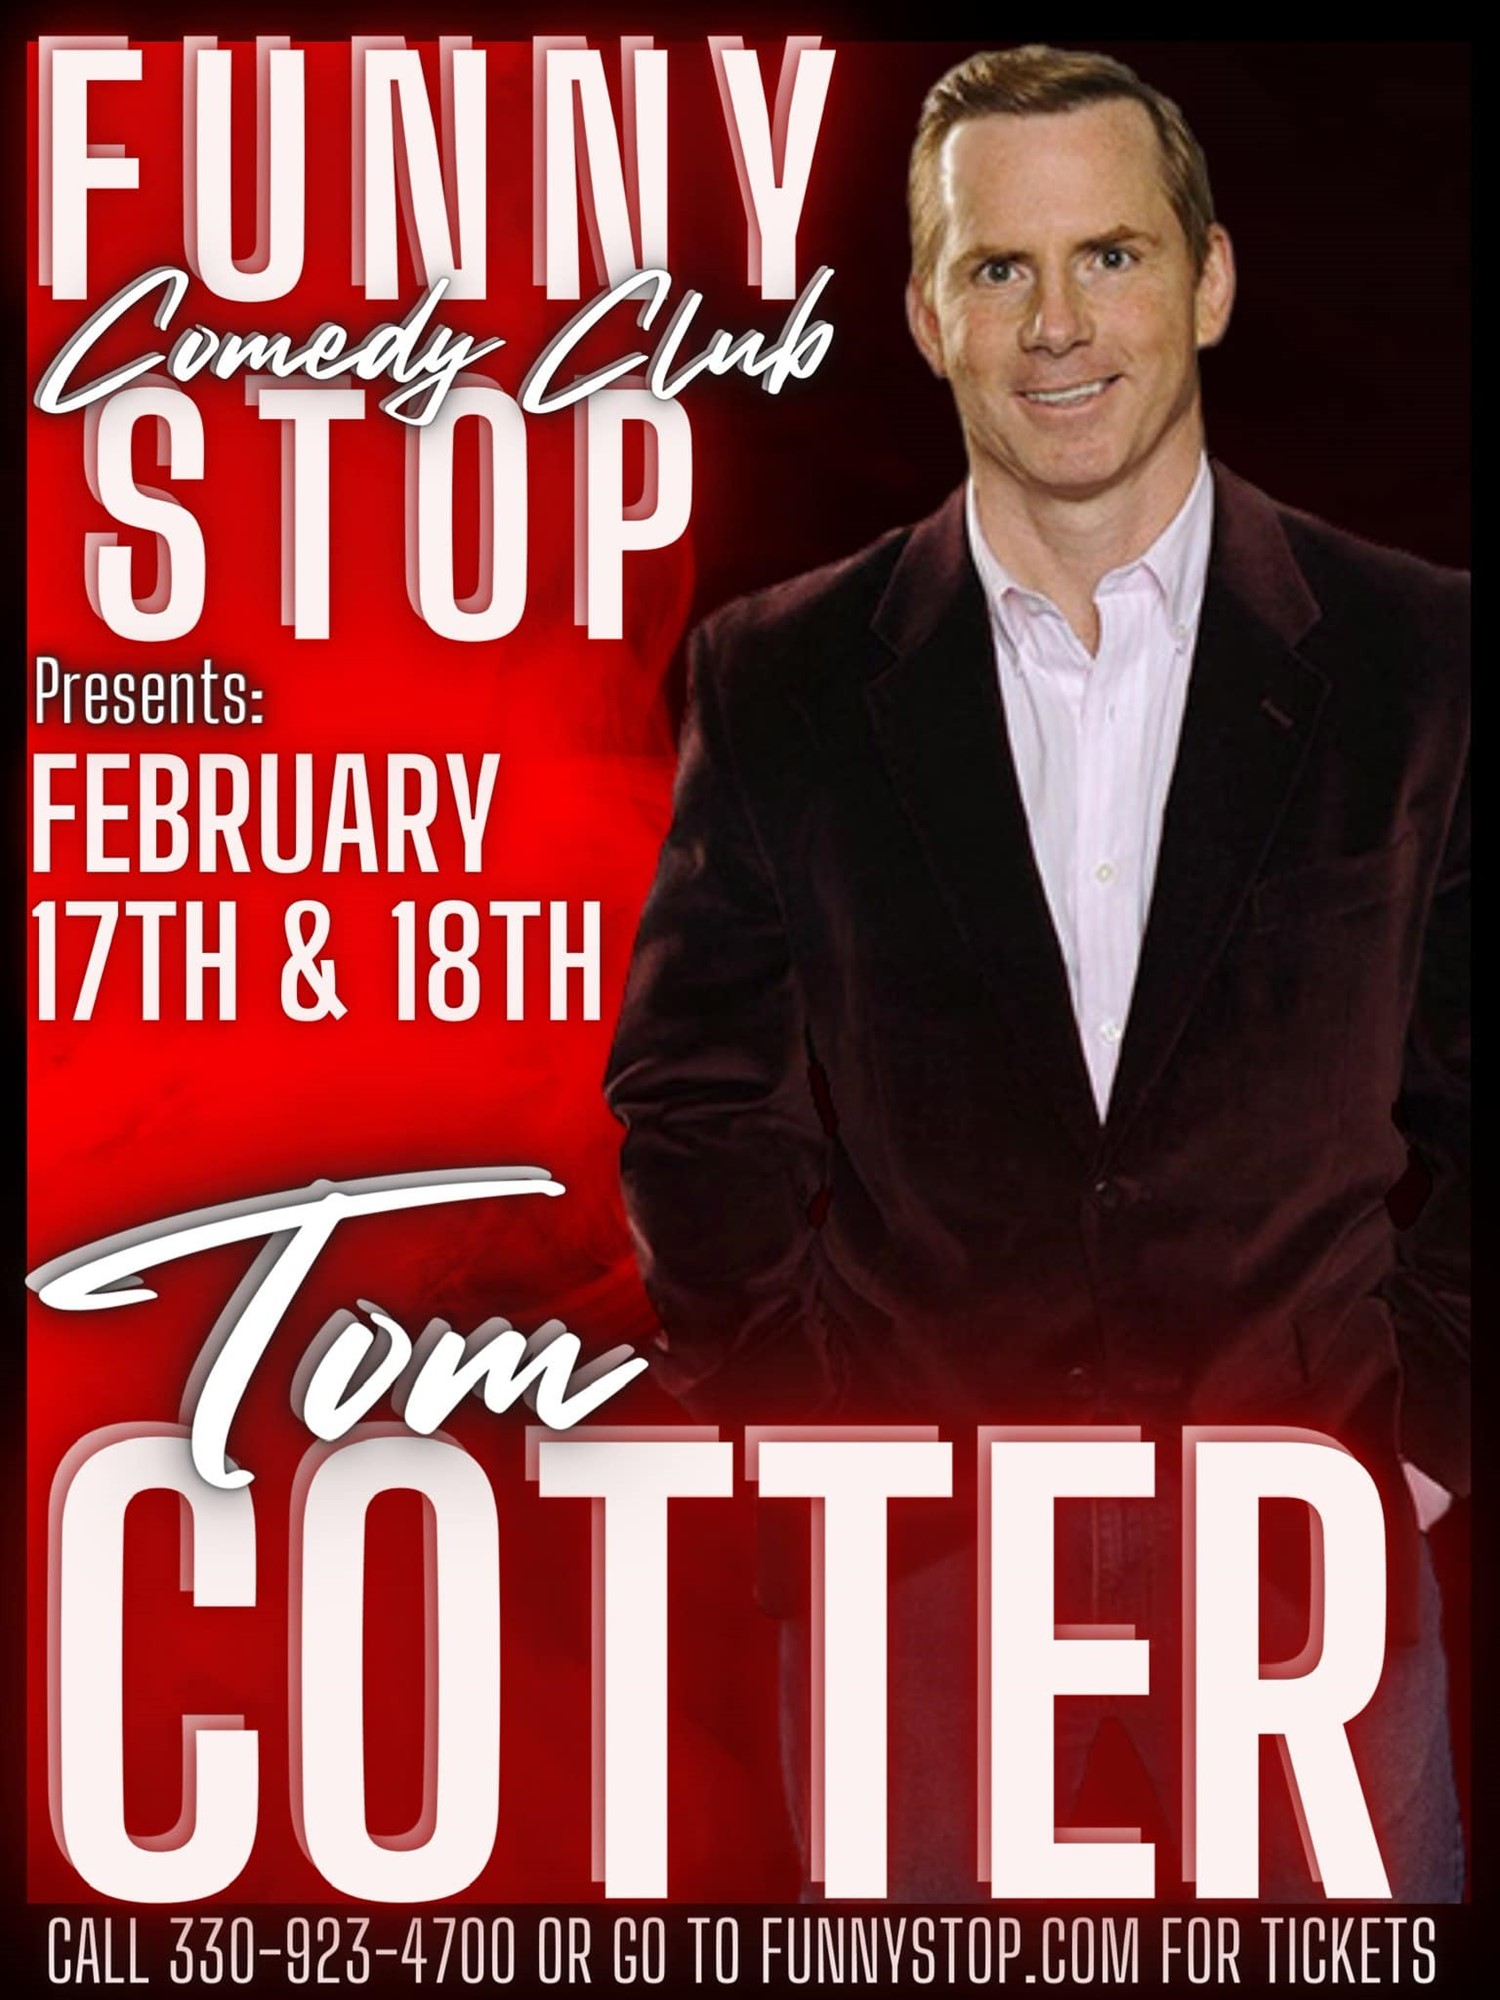 Tom Cotter Sat. 9:30pm Show Funny Stop Comedy Club on feb. 18, 21:30@Funny Stop Comedy Club - Compra entradas y obtén información enFunny Stop funnystop.online